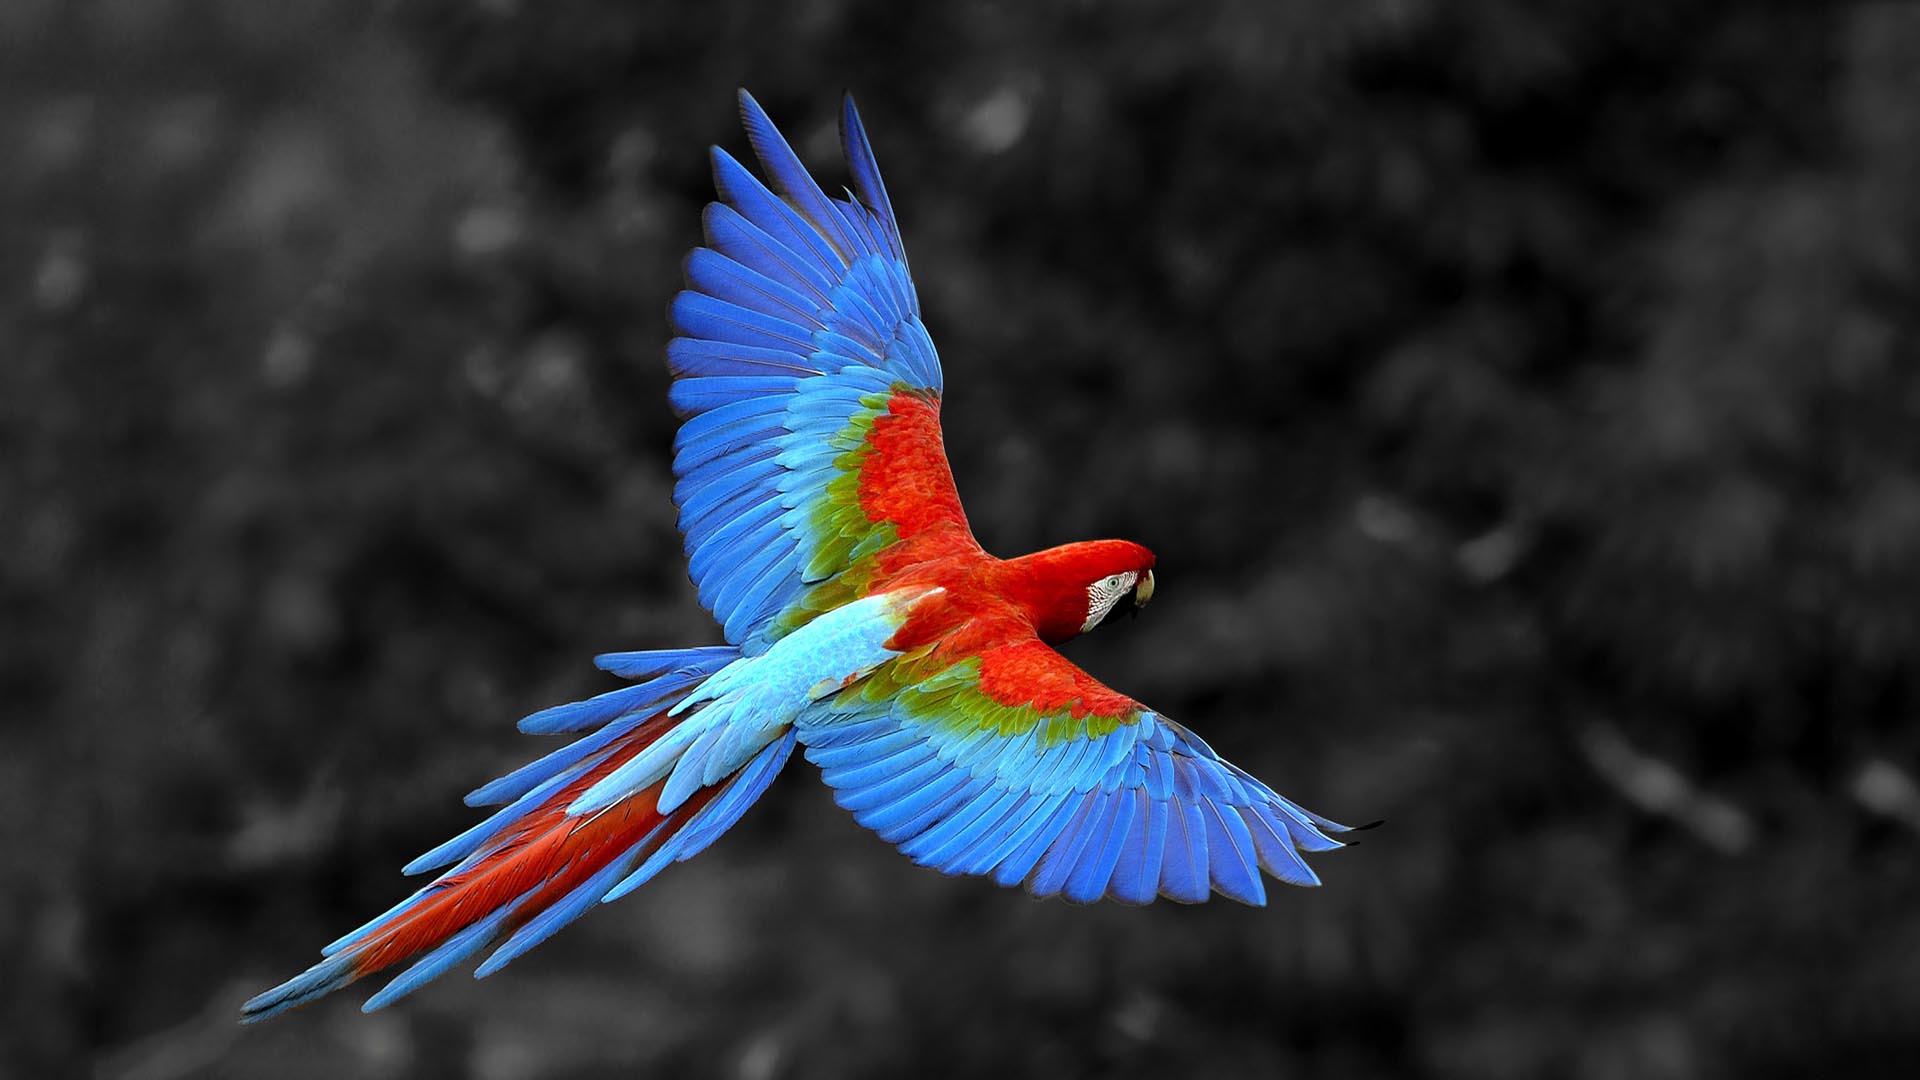 Parrot Wallpaper Animals Background - Parrot With Wings Open , HD Wallpaper & Backgrounds